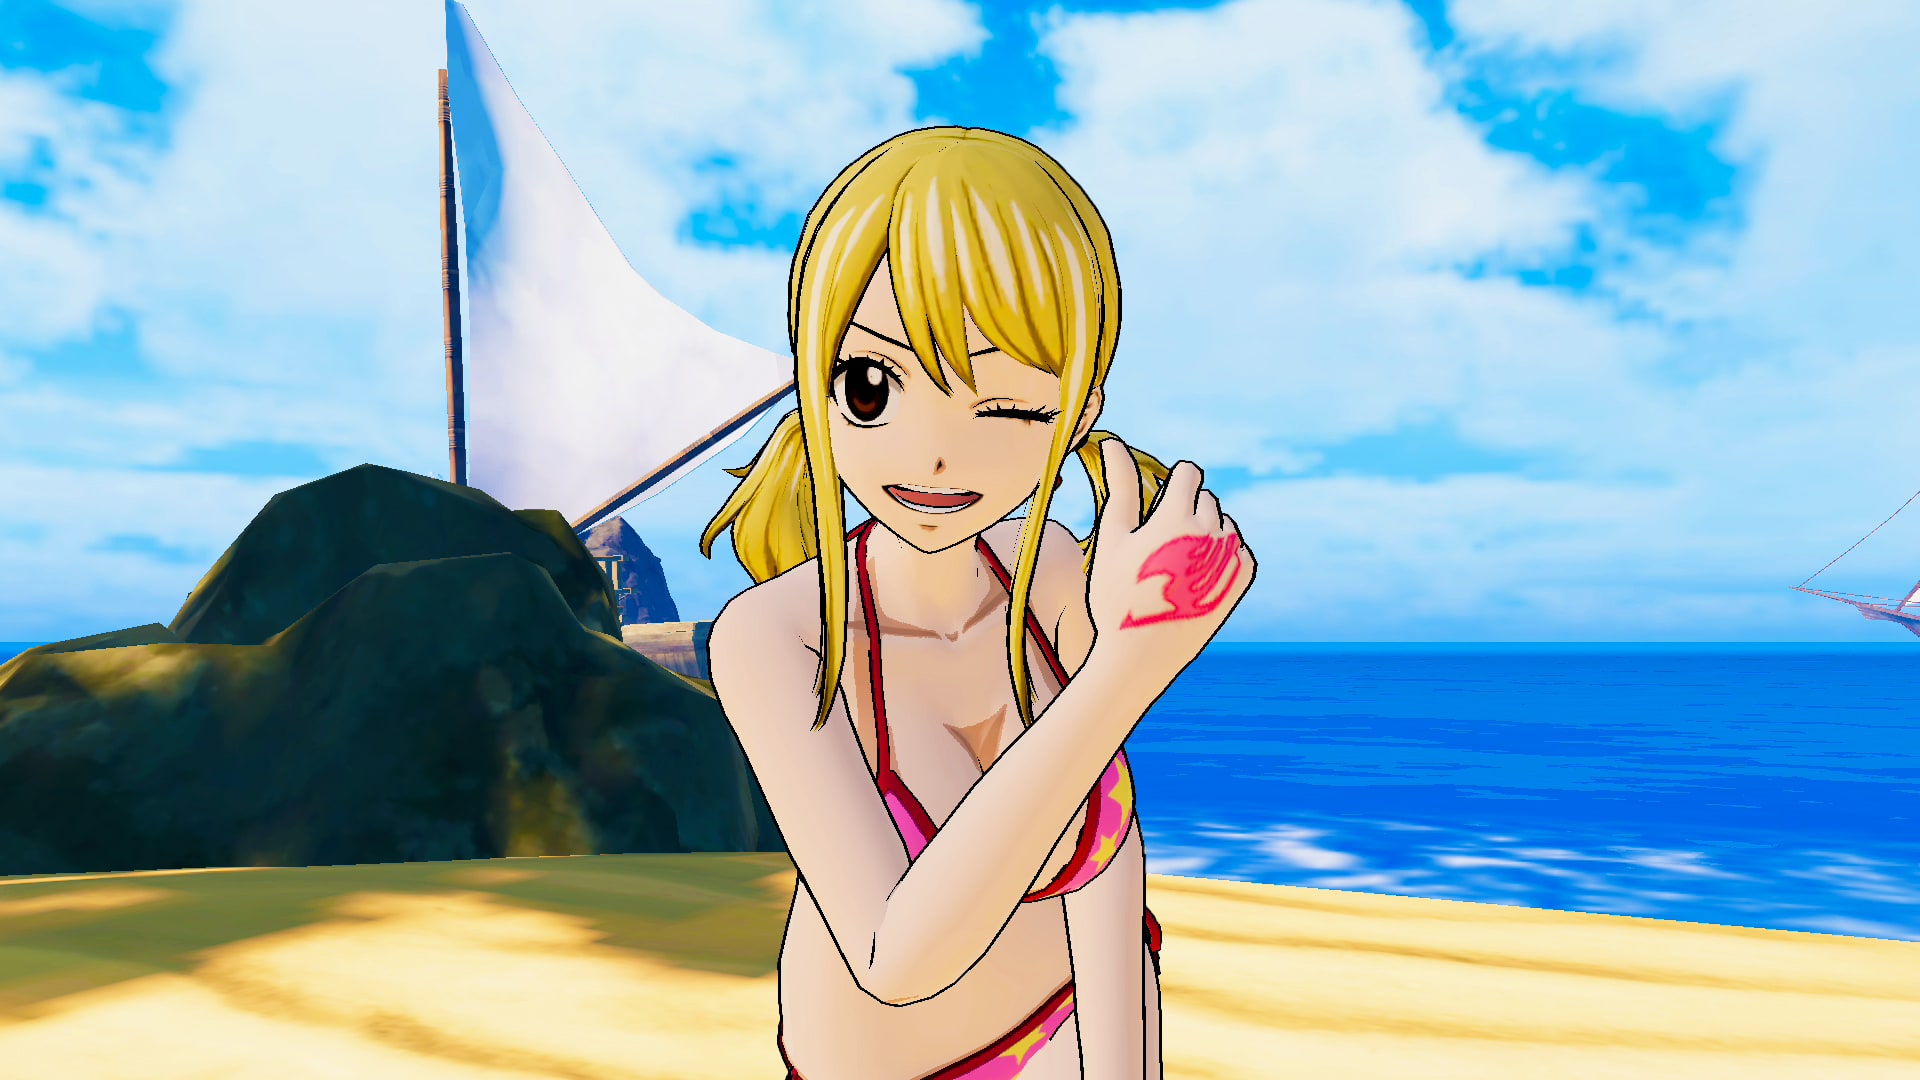 Lucy's Costume "Special Swimsuit" 1